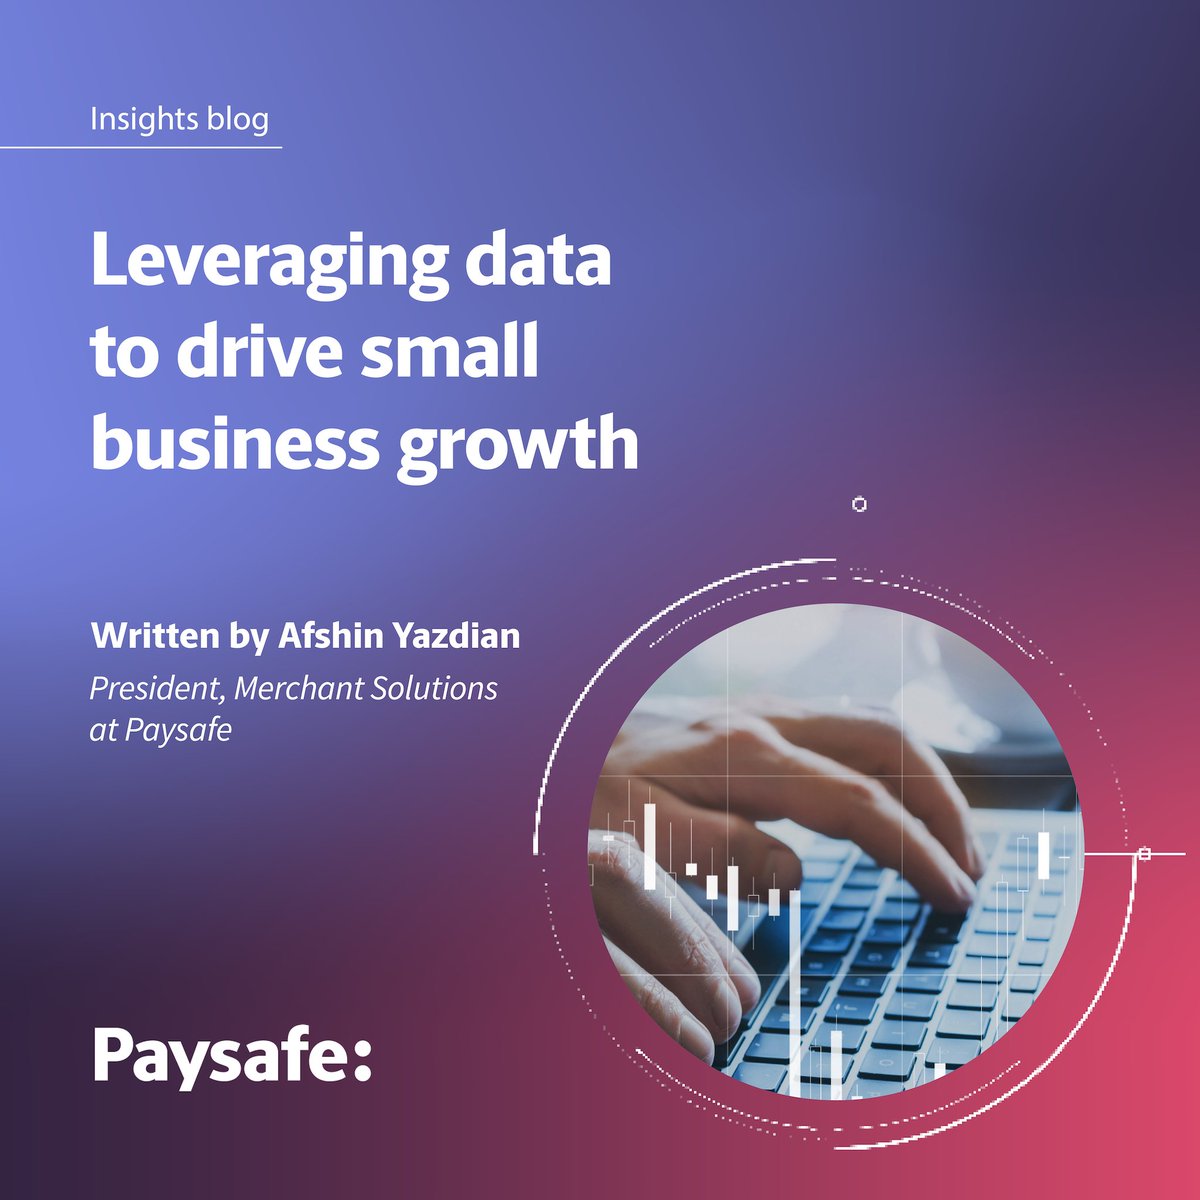 Our new partnership with @MarkaazGlobal highlights the importance of leveraging essential business data to drive long-term growth for #SMBs. Read more in our latest Insights blog: bit.ly/3WpXYJW